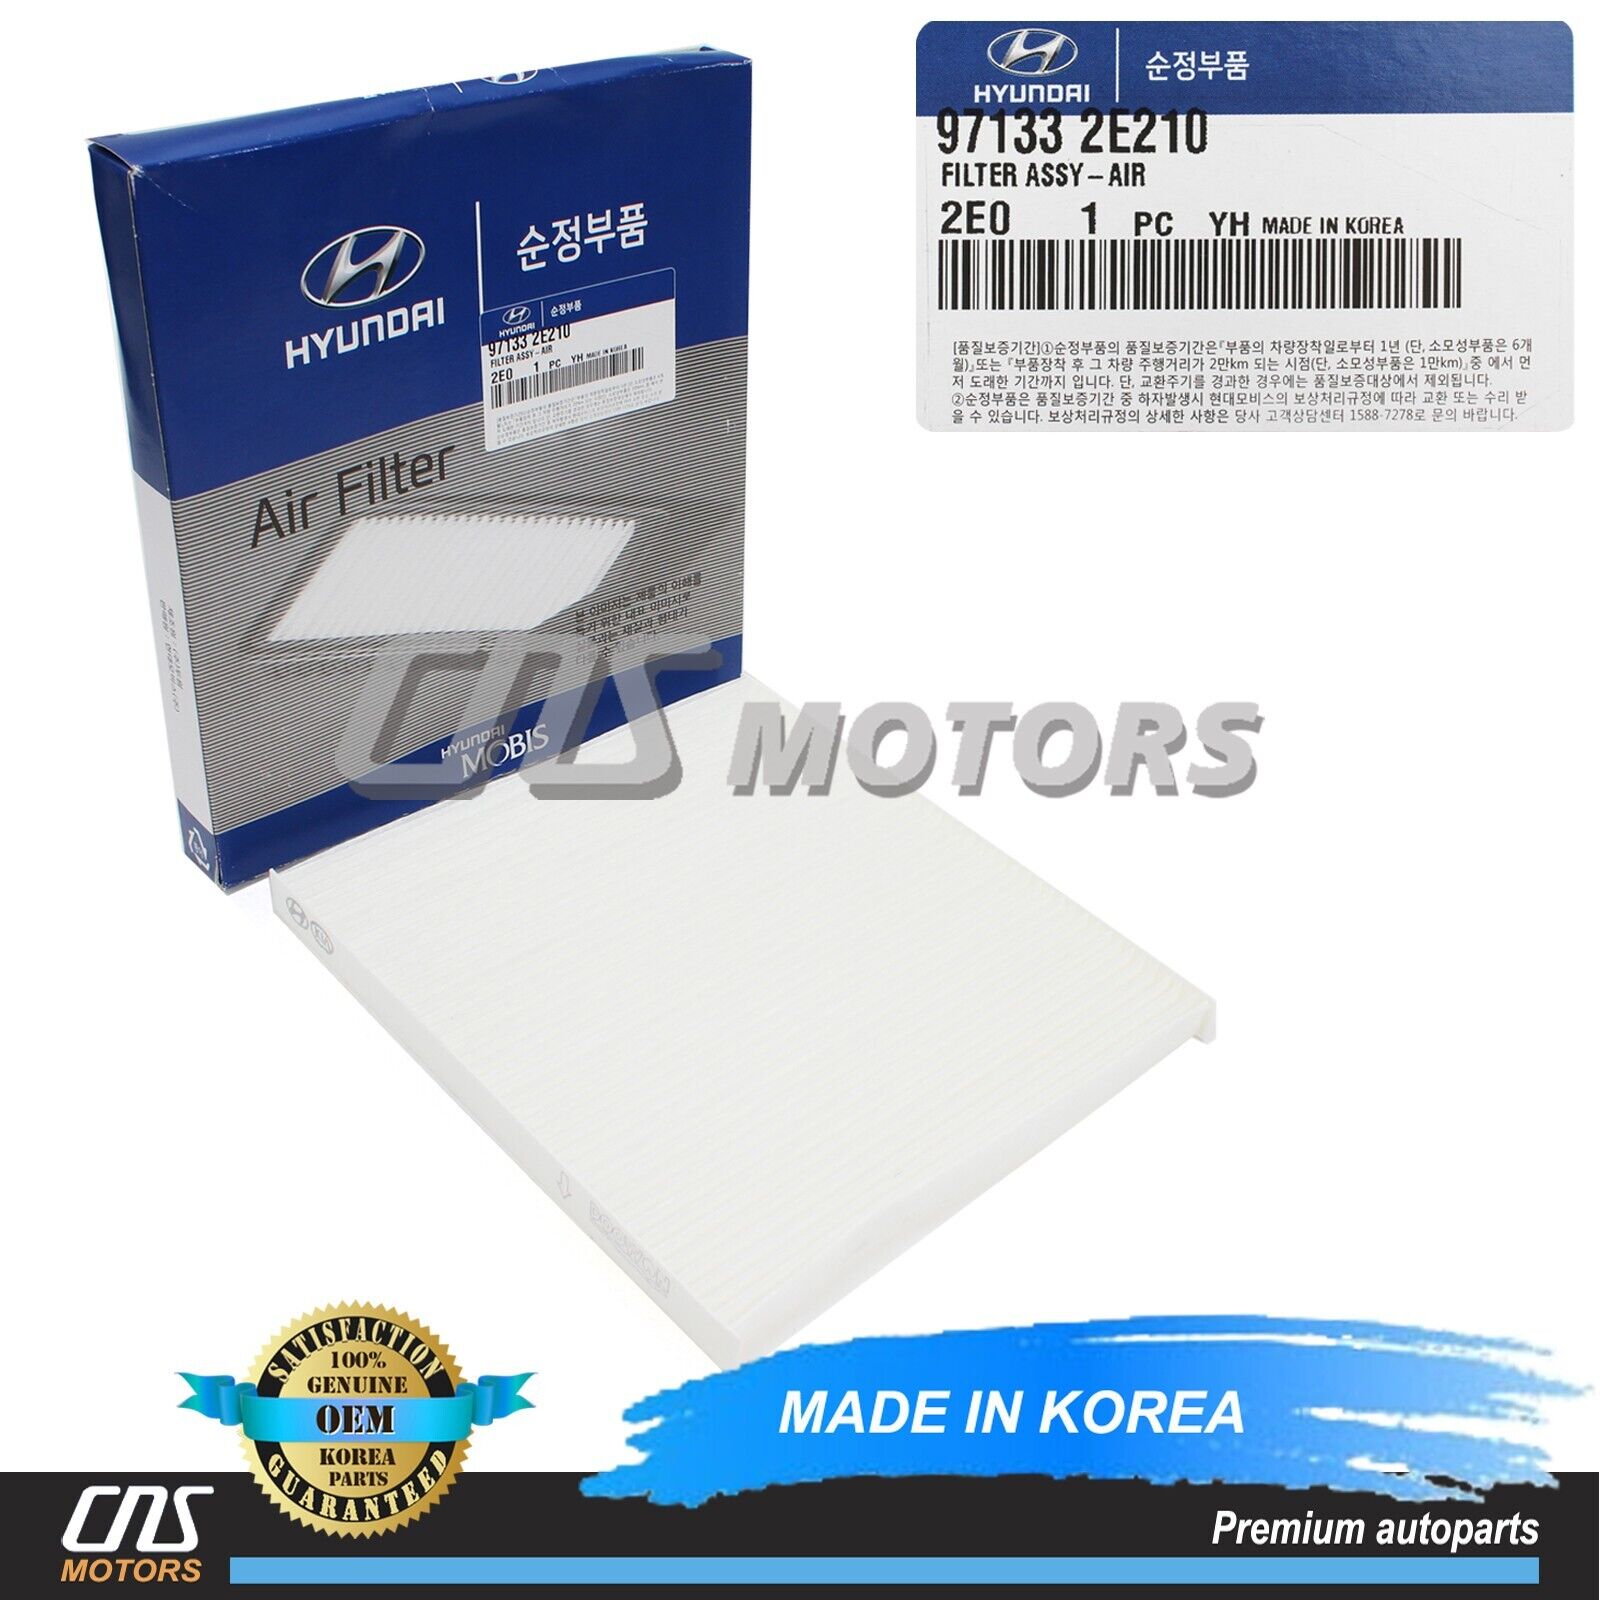 ✅GENUINE✅ Air Filter for Accent Genesis Coupe Tucson Veloster Forte Rio Sportage